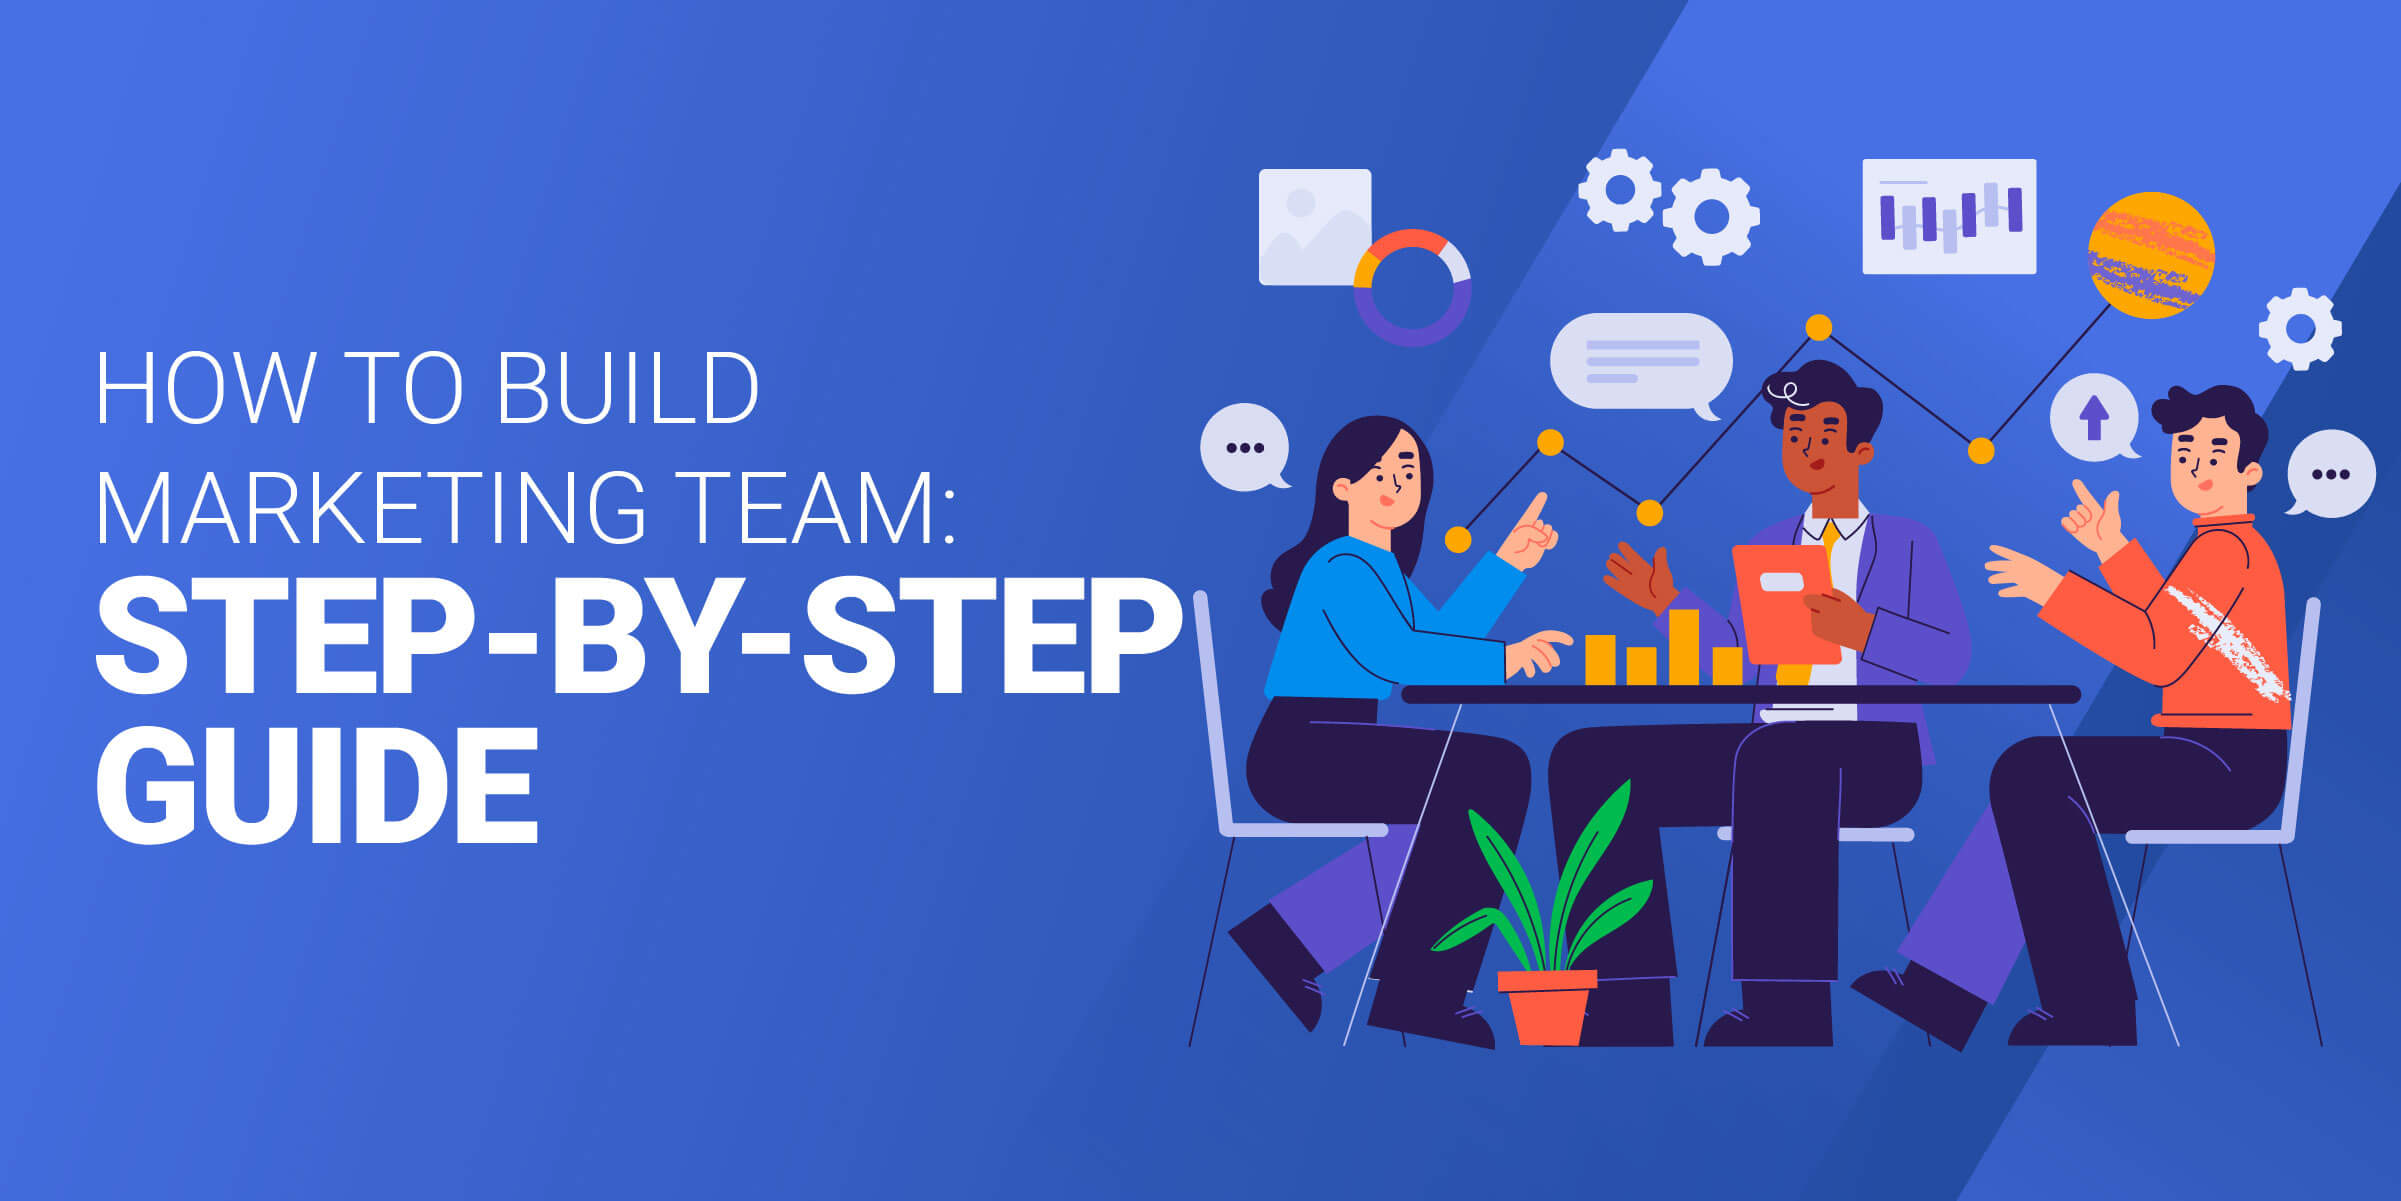 How to Build Marketing Team Step by Step